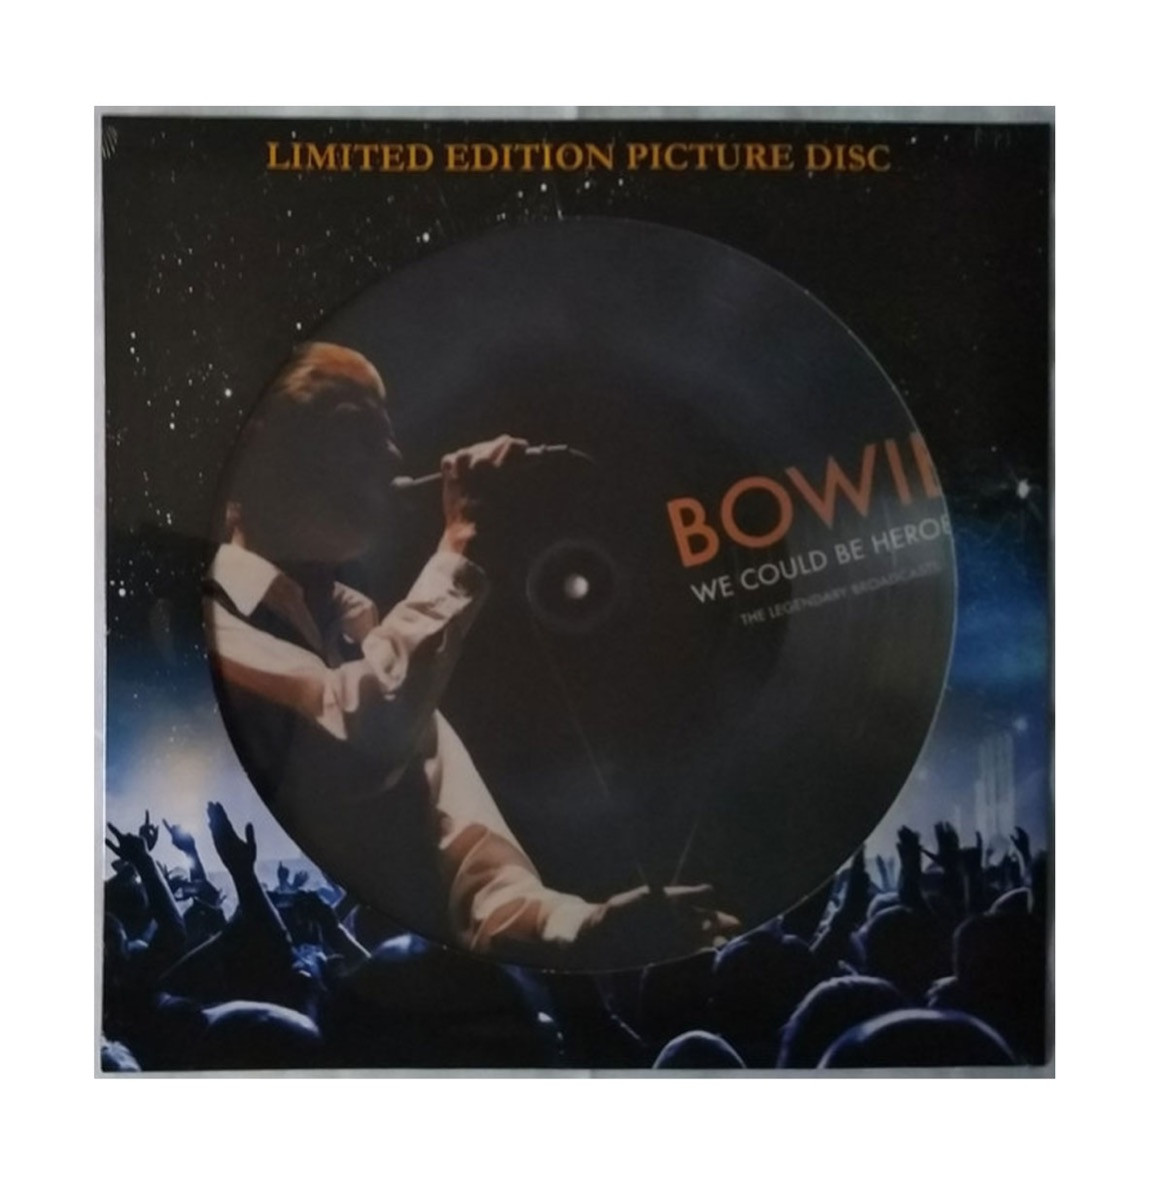 David Bowie - We Could Be Heroes - The Legendary Broadcasts (Picture Disc) LP